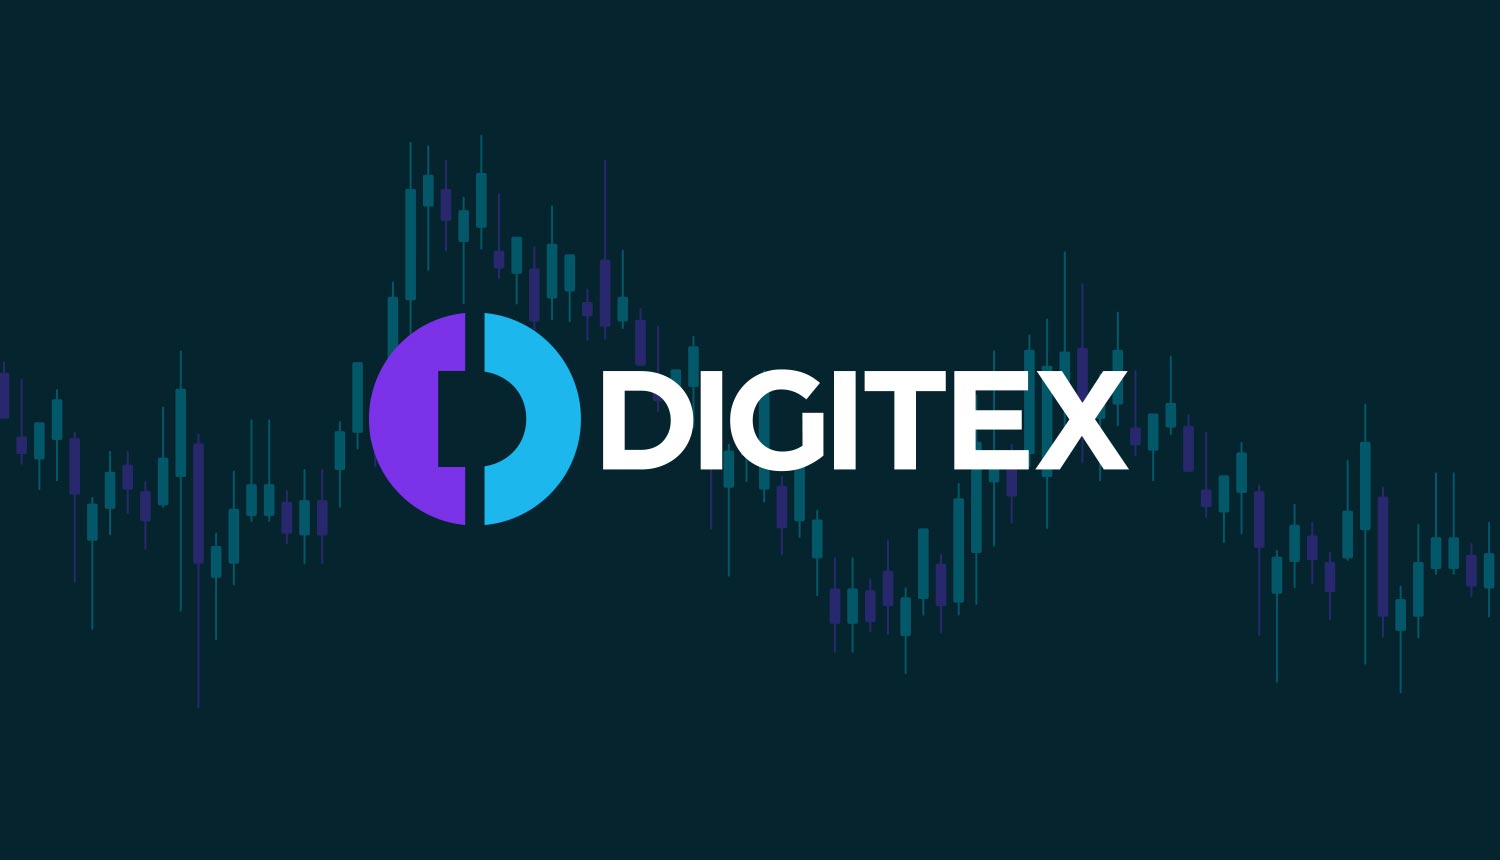 Digitex Futures Launches Beta Version of Its Commission-Free Bitcoin Futures Exchange